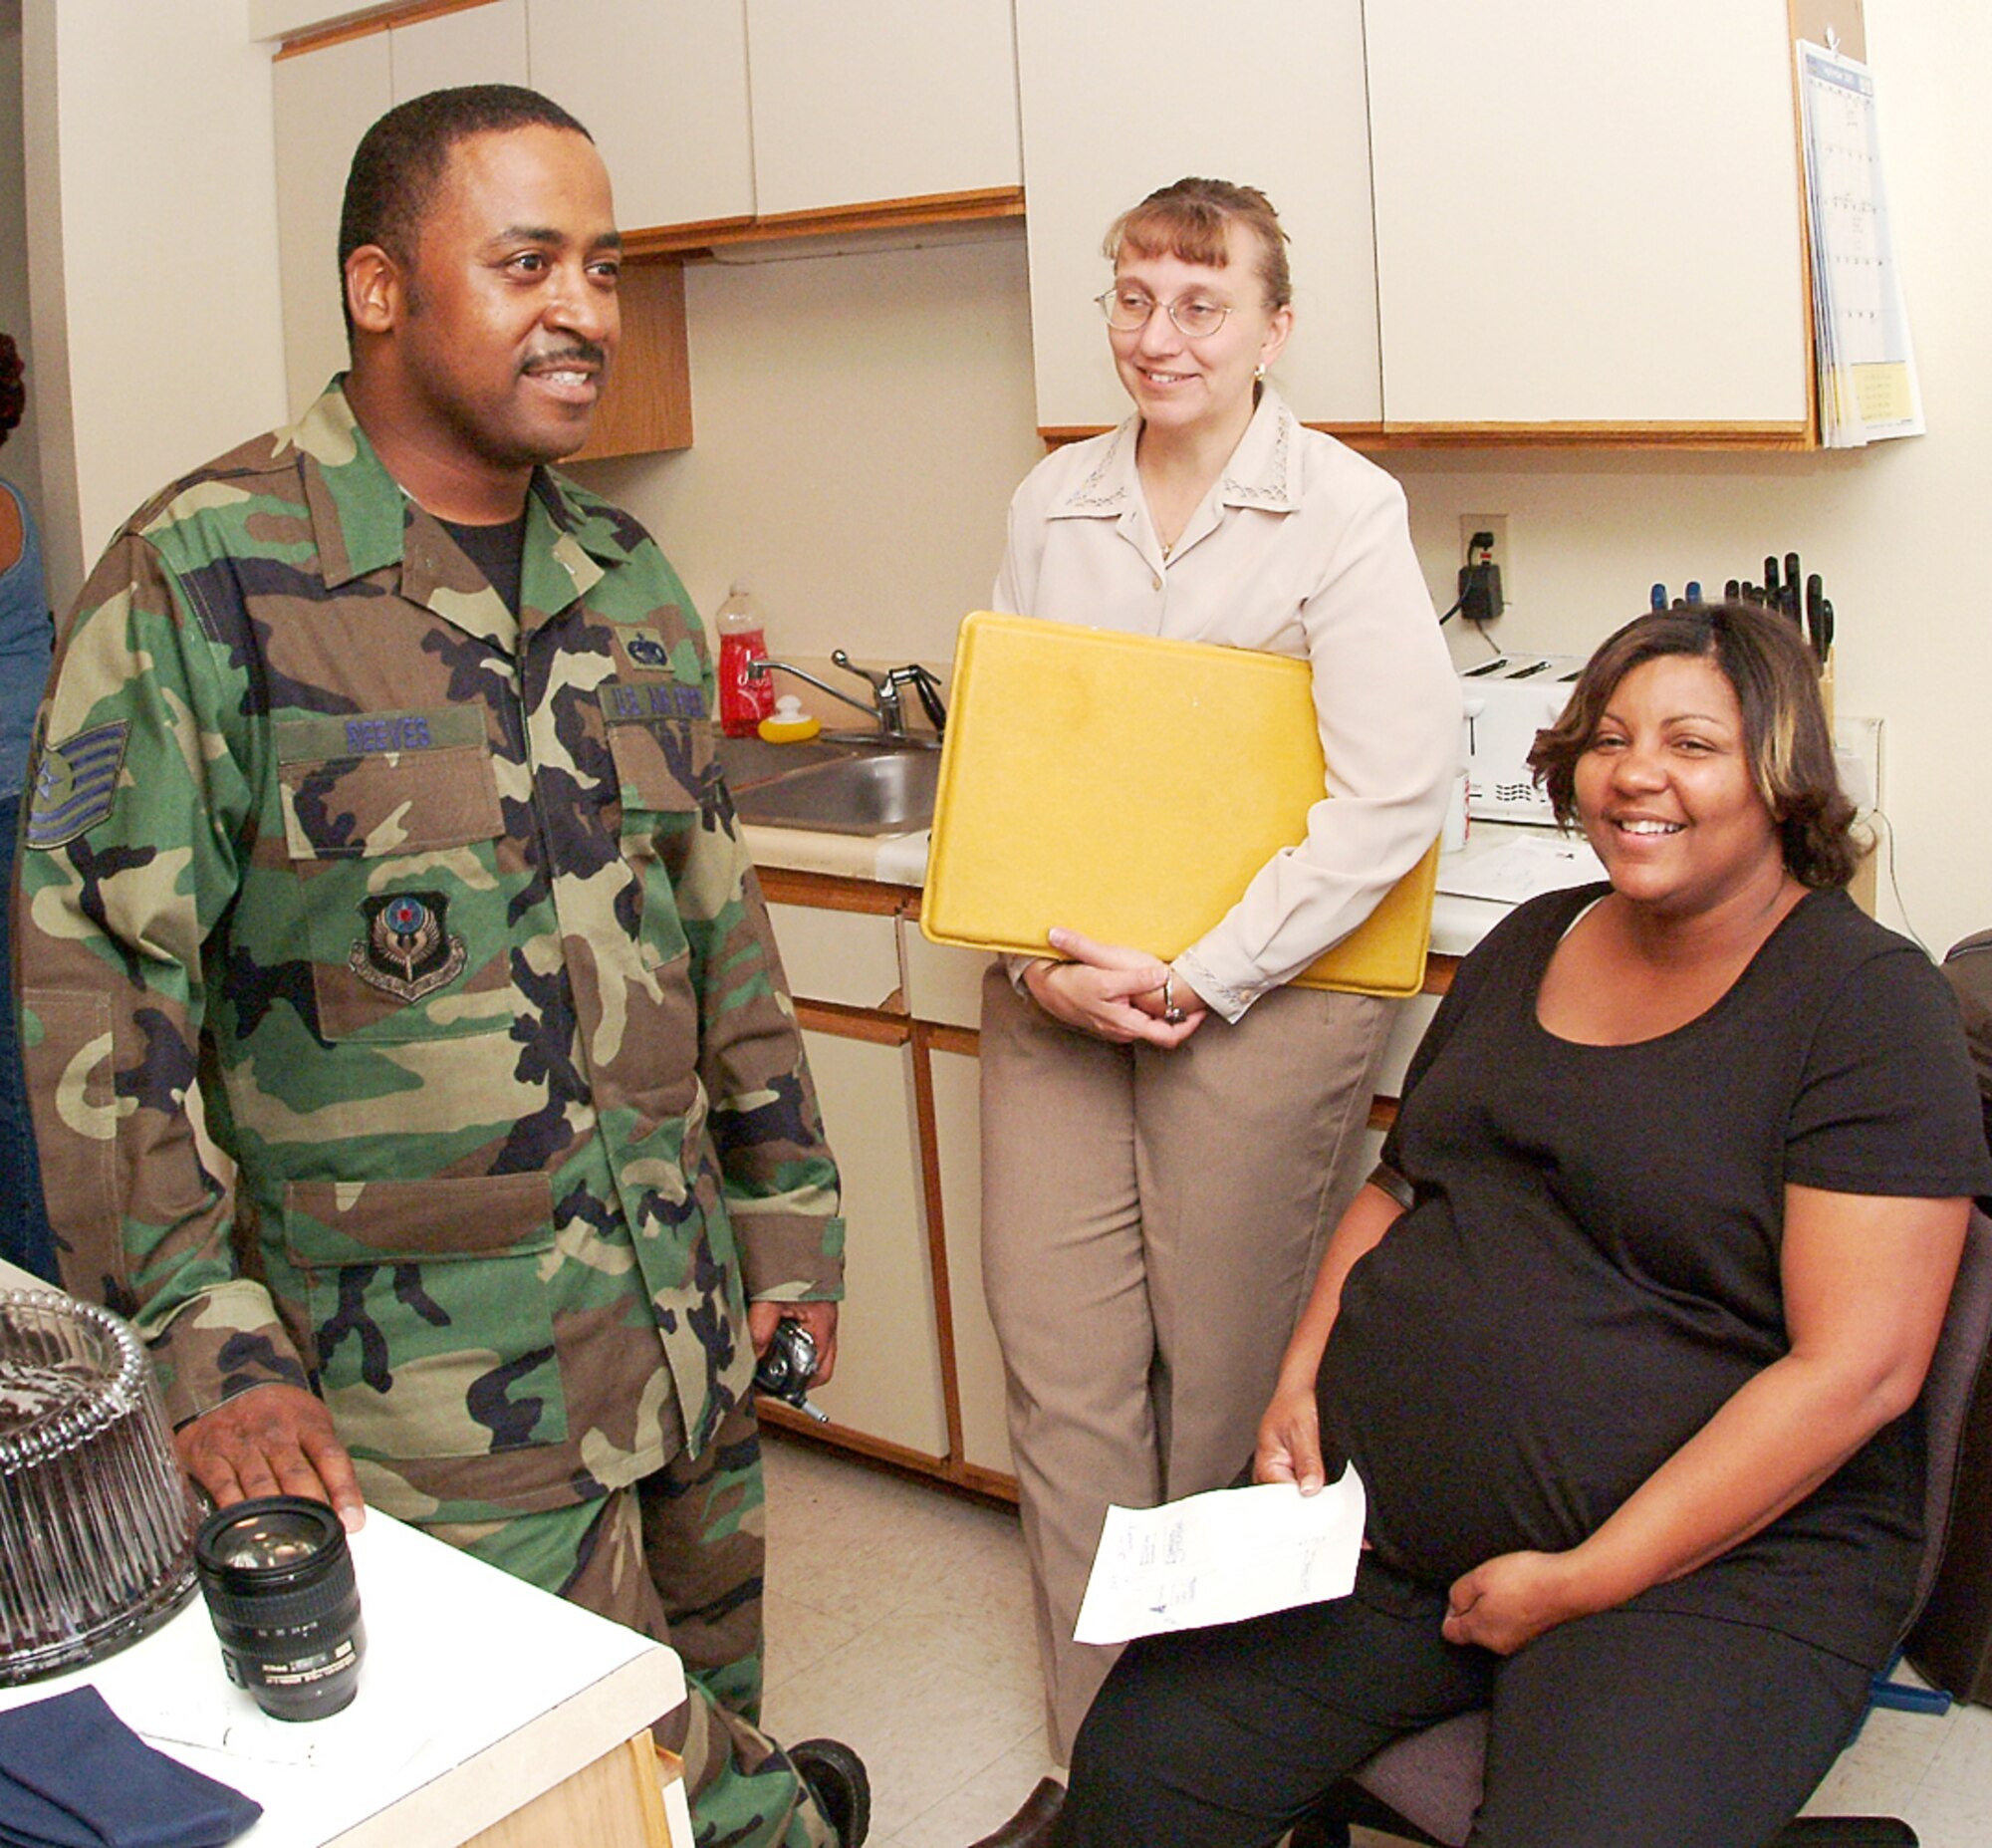 HURLBURT FIELD, Fla. -- Tech. Sgt. Christopher Reeves, his wife Donnice and Kathy Thompson (center) share a moment in the kitchen of the Reeves' home.  Mrs. Thompson and a crew from the 53rd Wing at nearby Eglin Air Force Base had just dropped off dinner for the family of 22 who escaped Hurricane Katrina to stay here with the Reeves.  Sergeant Reeves is assigned to the 16th Logistics Readiness Squadron here.  (U.S. Air Force photo by Master Sgt. Tonya Keebaugh)